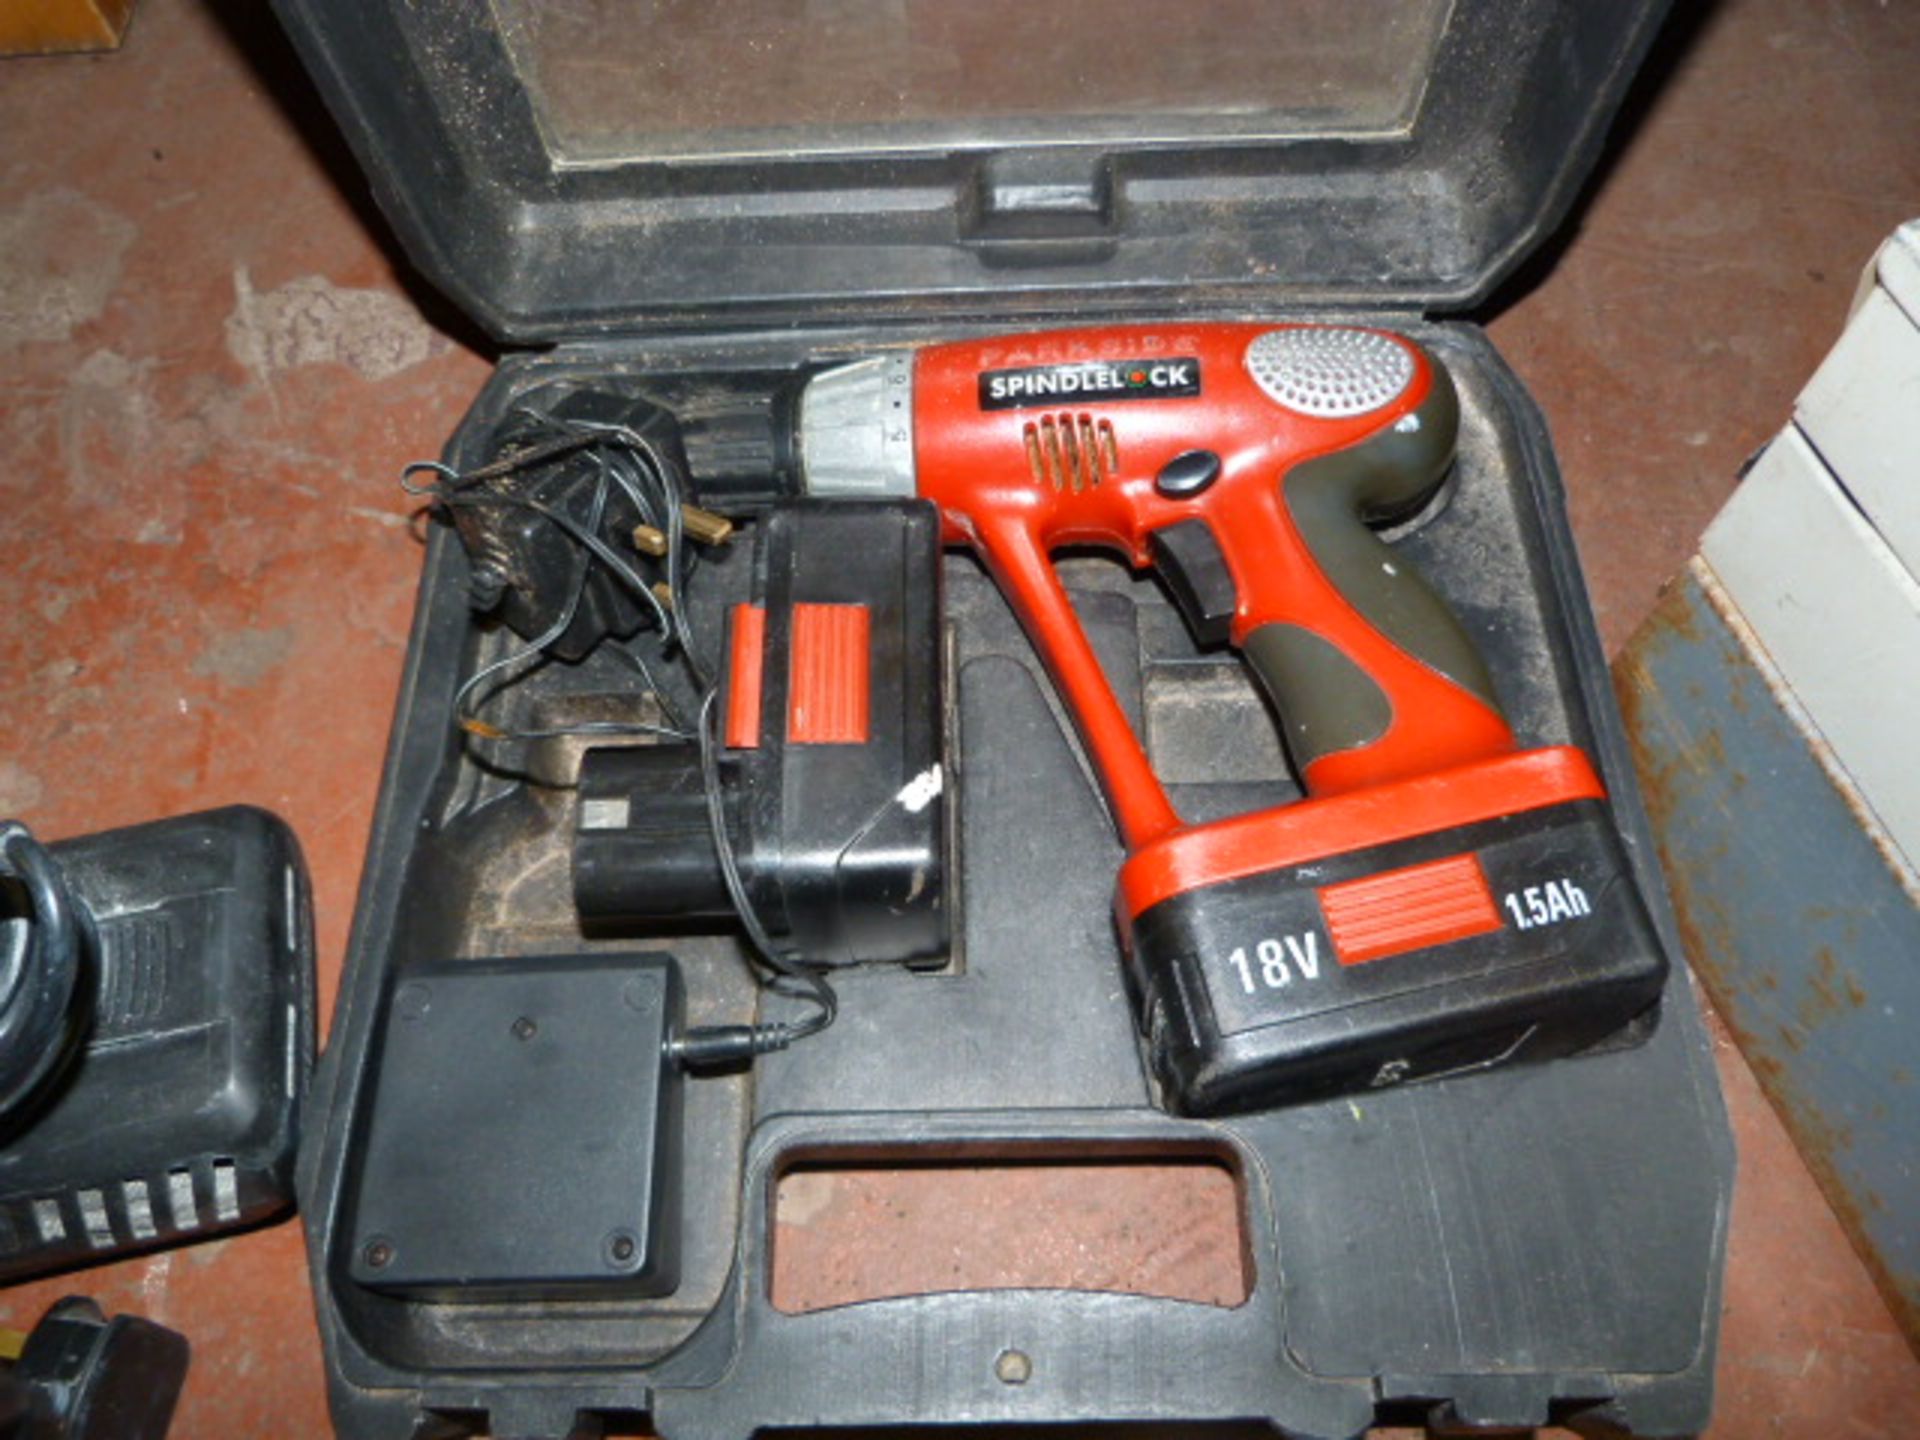 Spindle Cordless Drill